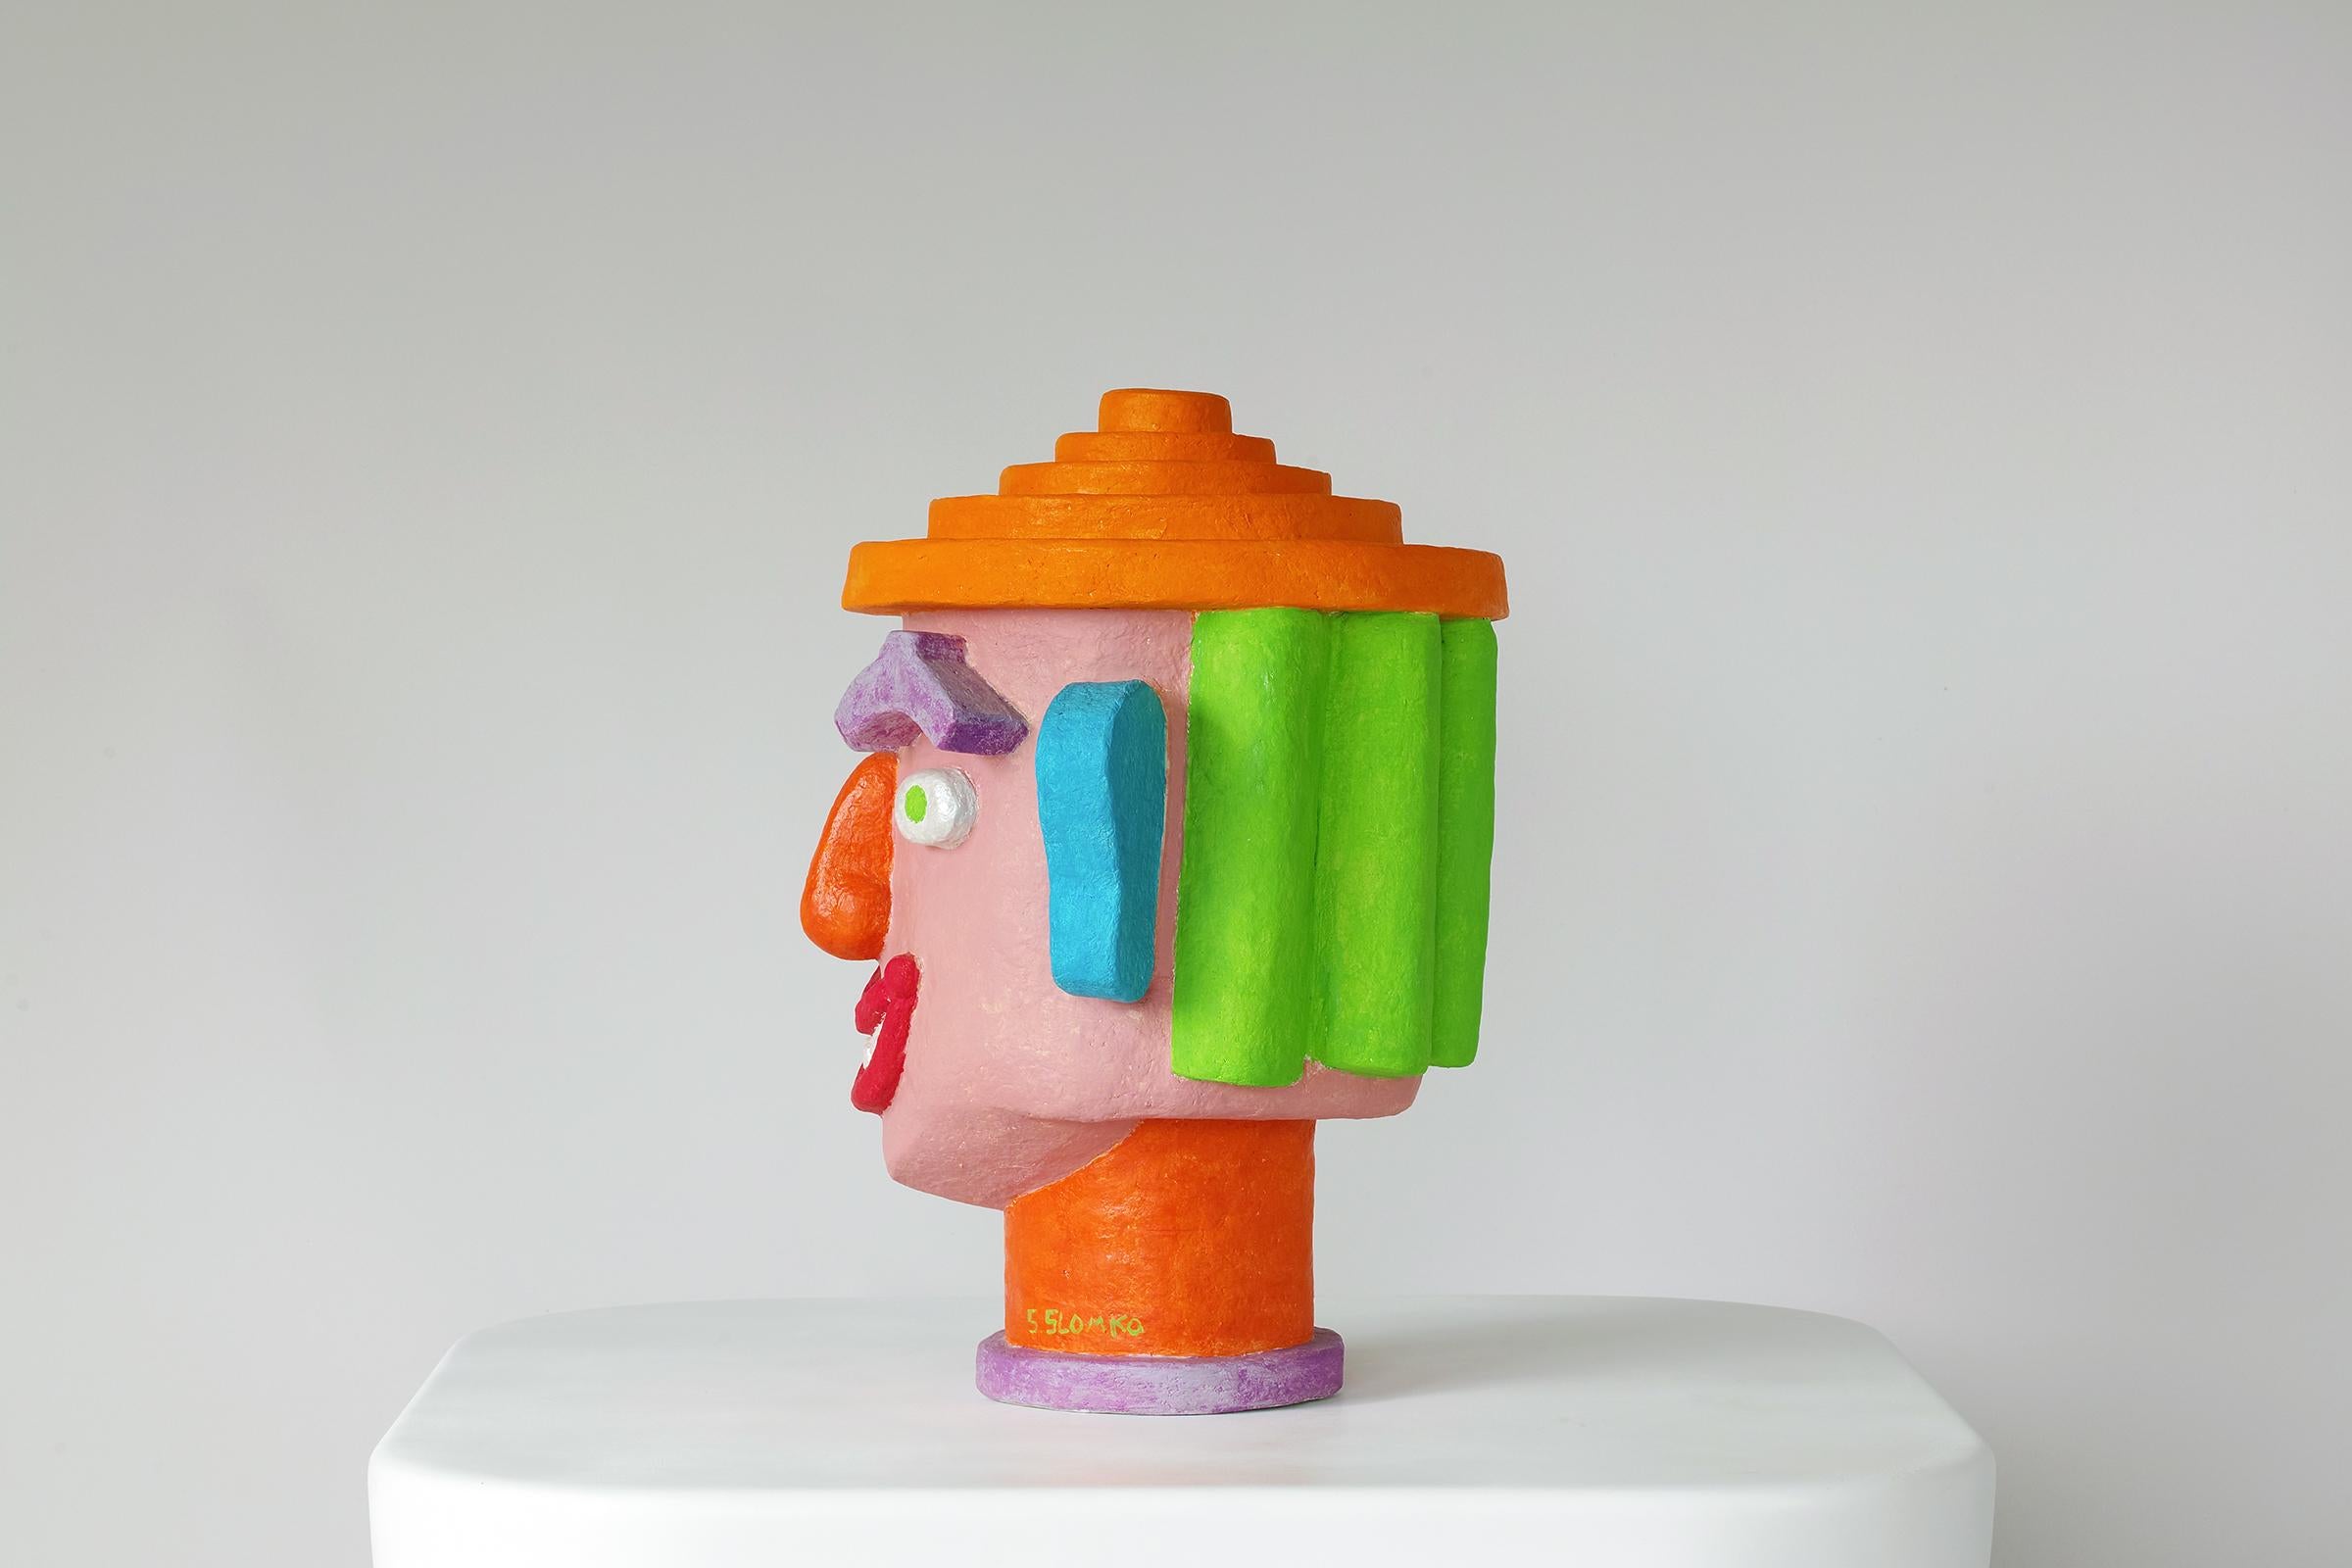 Outsider Art Fluorescent Papier-Mâché Bust Sculpture by Stephen Slomko In Excellent Condition For Sale In Brooklyn, NY